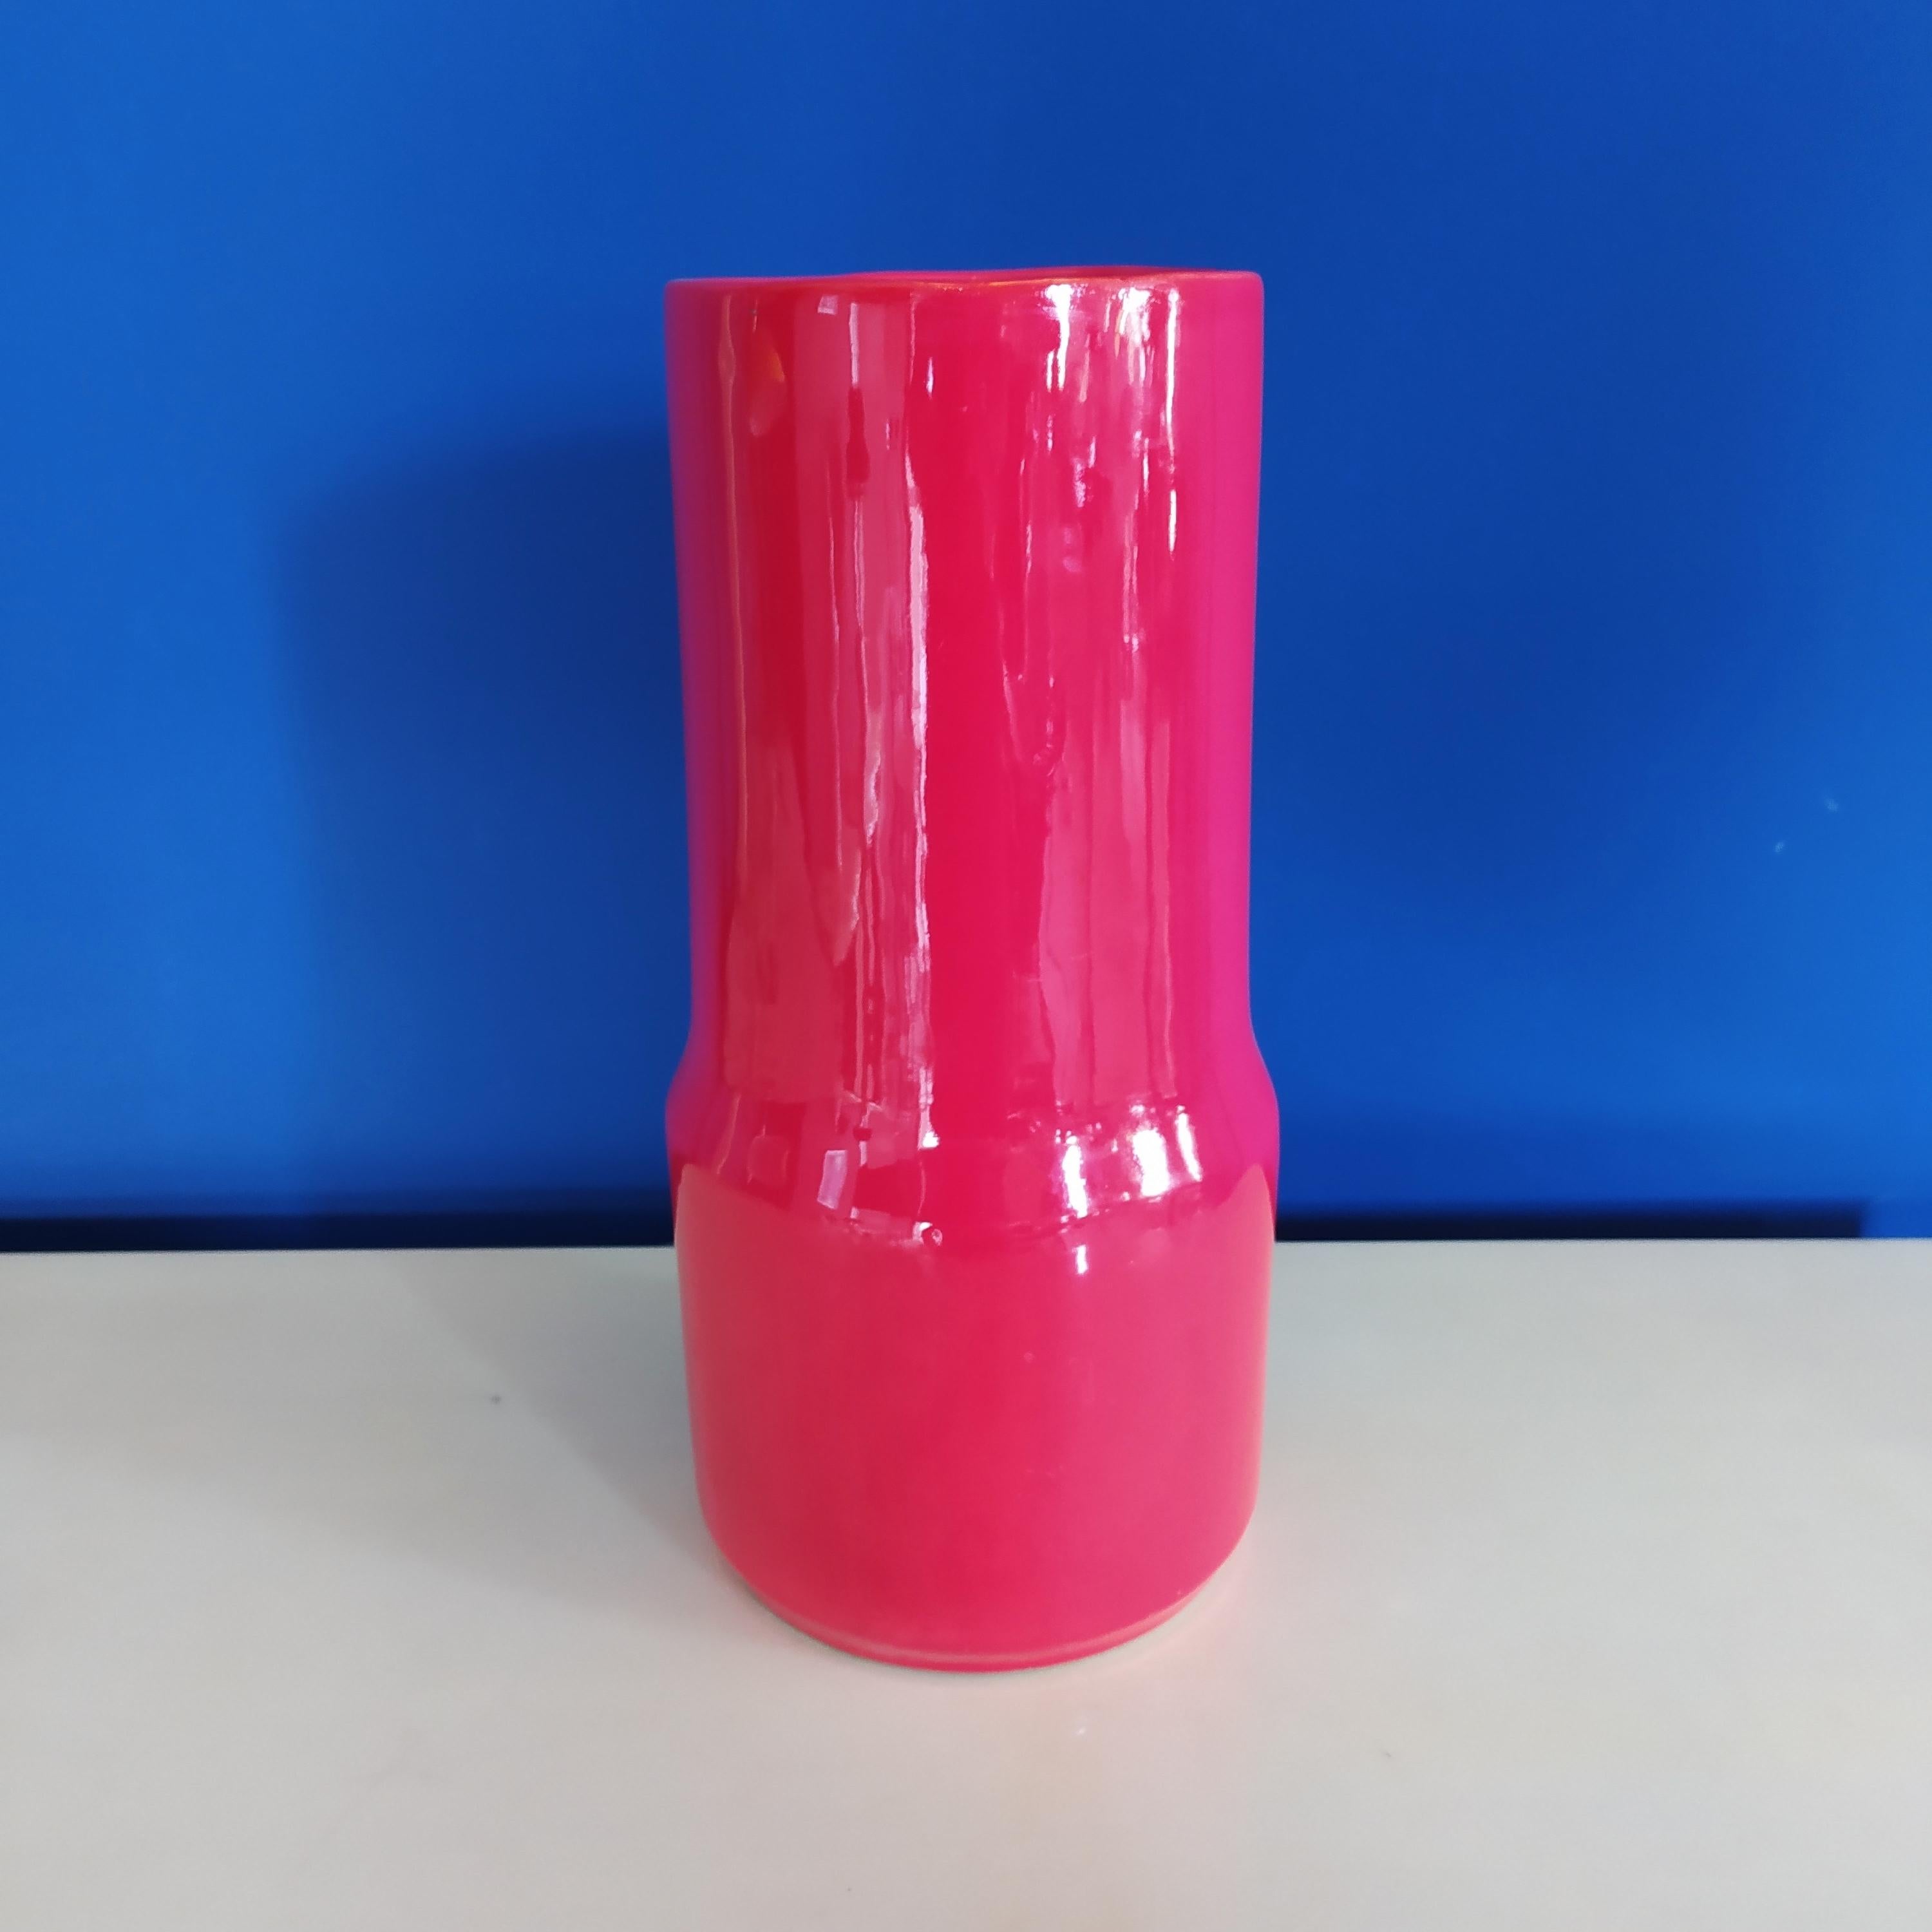 1970s Space Age red vase in ceramic by Gabbianelli, made in Italy.